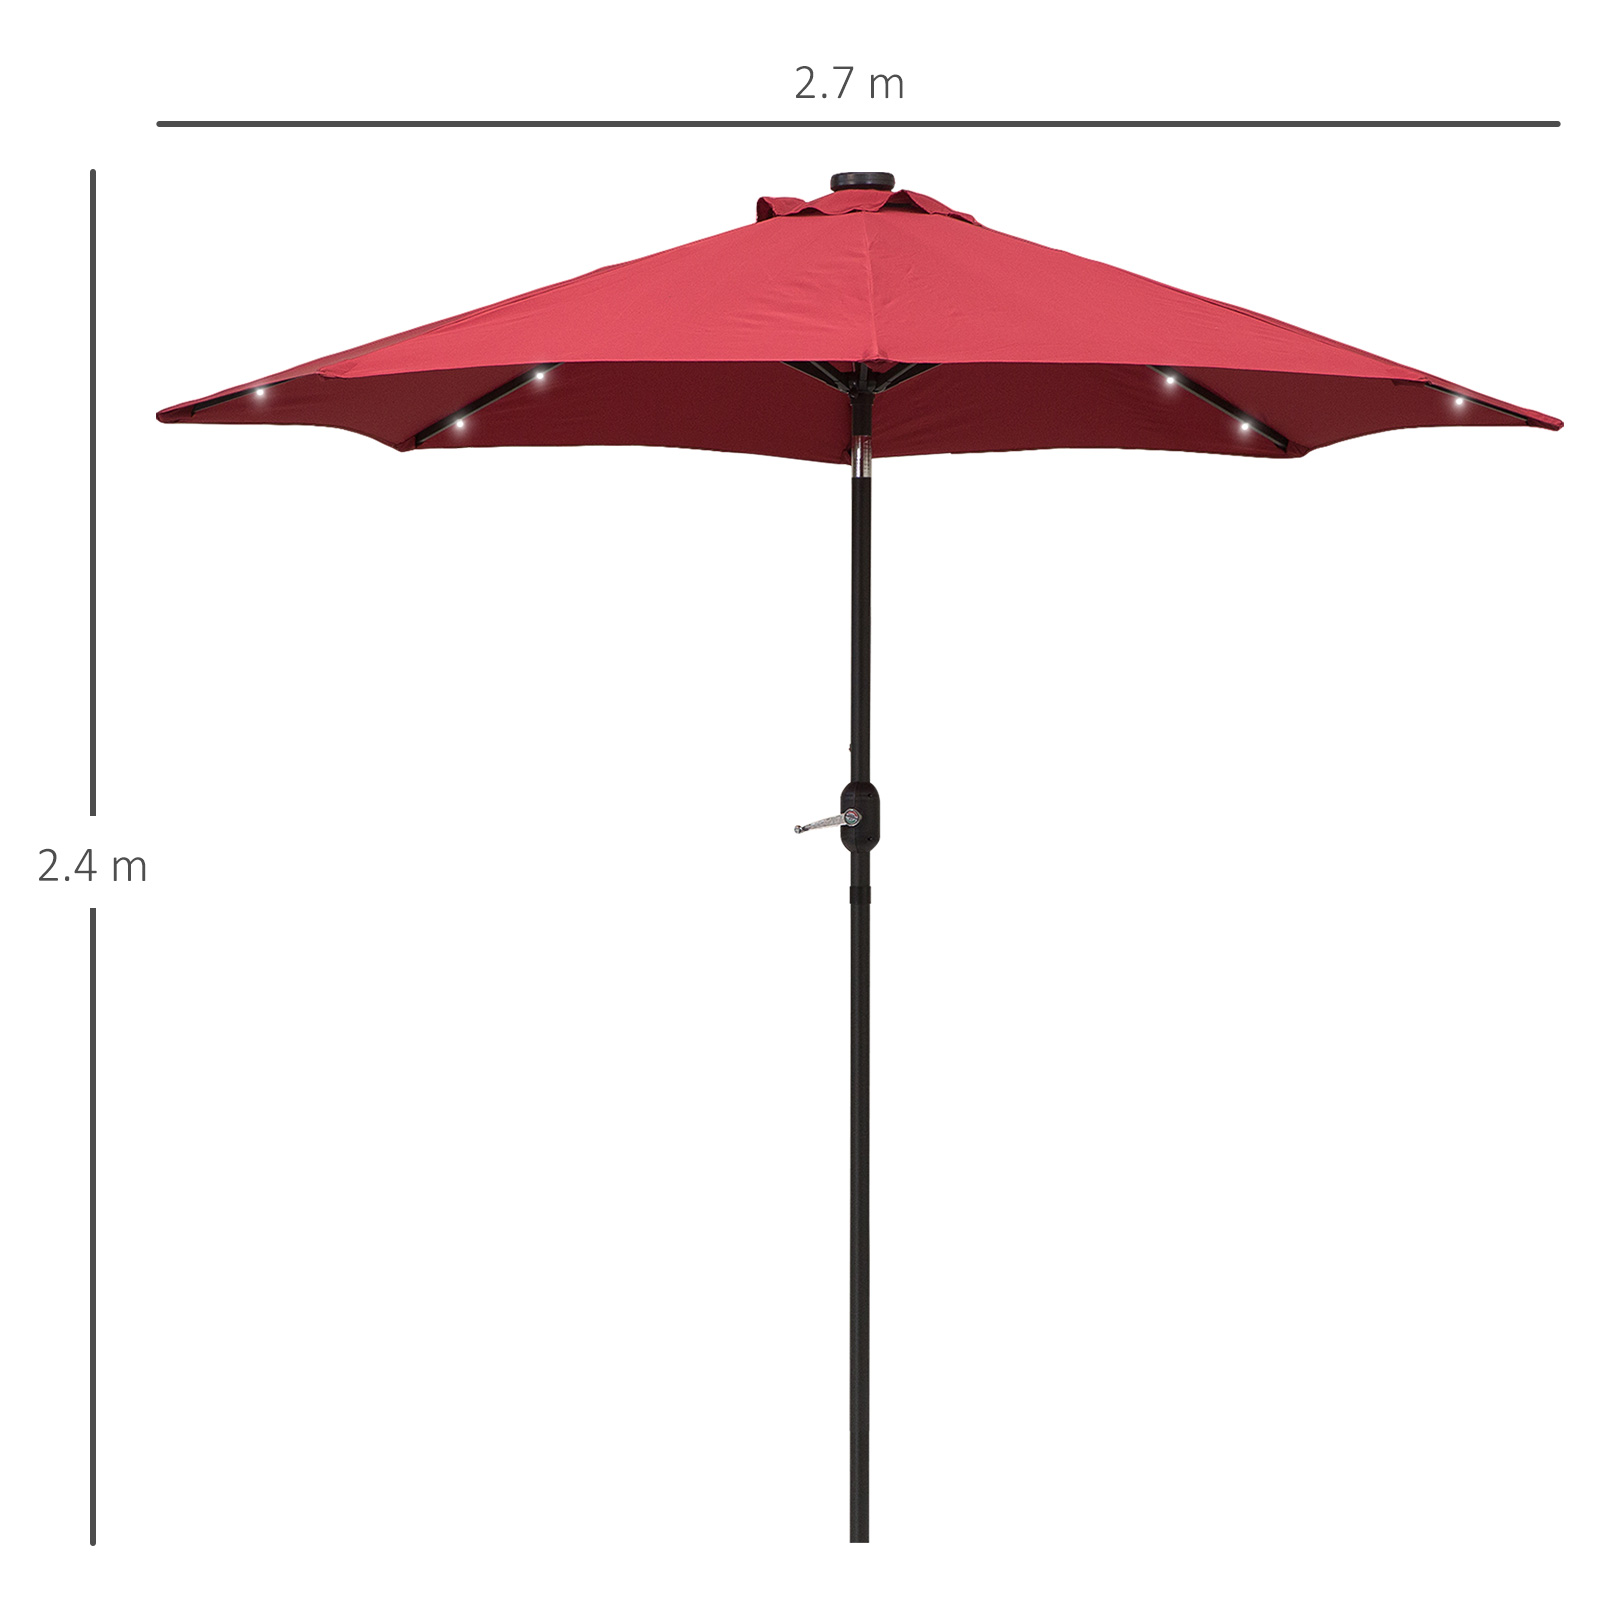 Outsunny 2.7m Patio Garden Umbrella Outdoor Parasol with Tilt Crank and 24 LEDs Lights (Red)